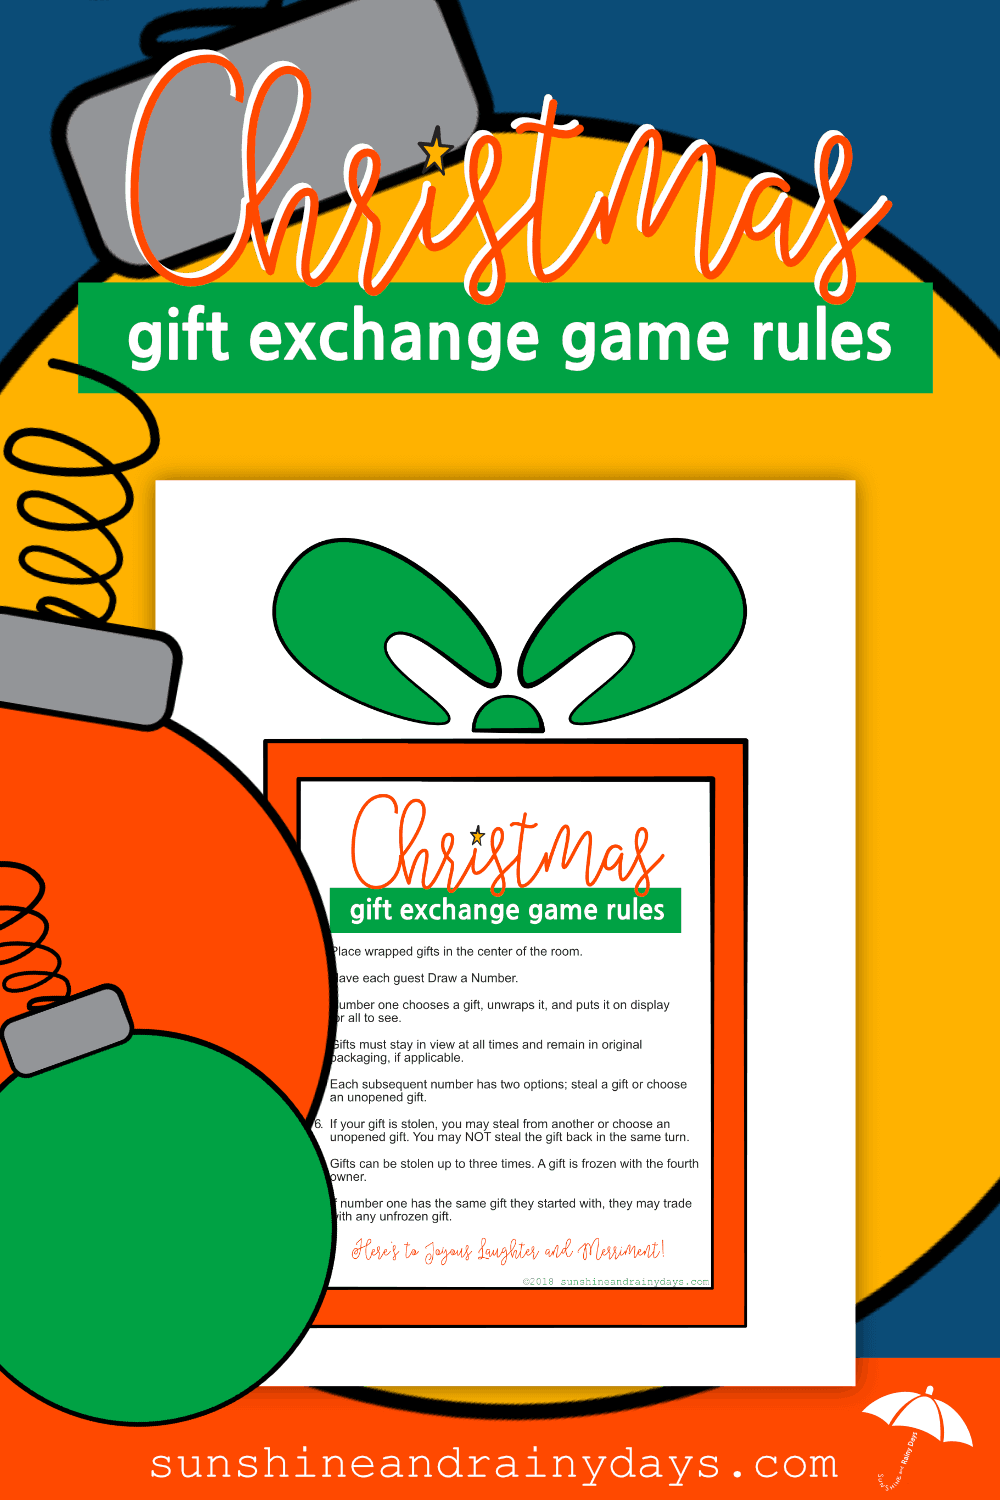 Christmas Gift Exchange Games are an excellent choice for a FUN Christmas celebration with friends and family. BUT ... you gotta have RULES! No game is complete without the tried and true rules. Gift Exchange Games | Gift Exchange Game Rules | Christmas Gift Exchange Rules | #ChristmasGames #SunshineAndRainyDays